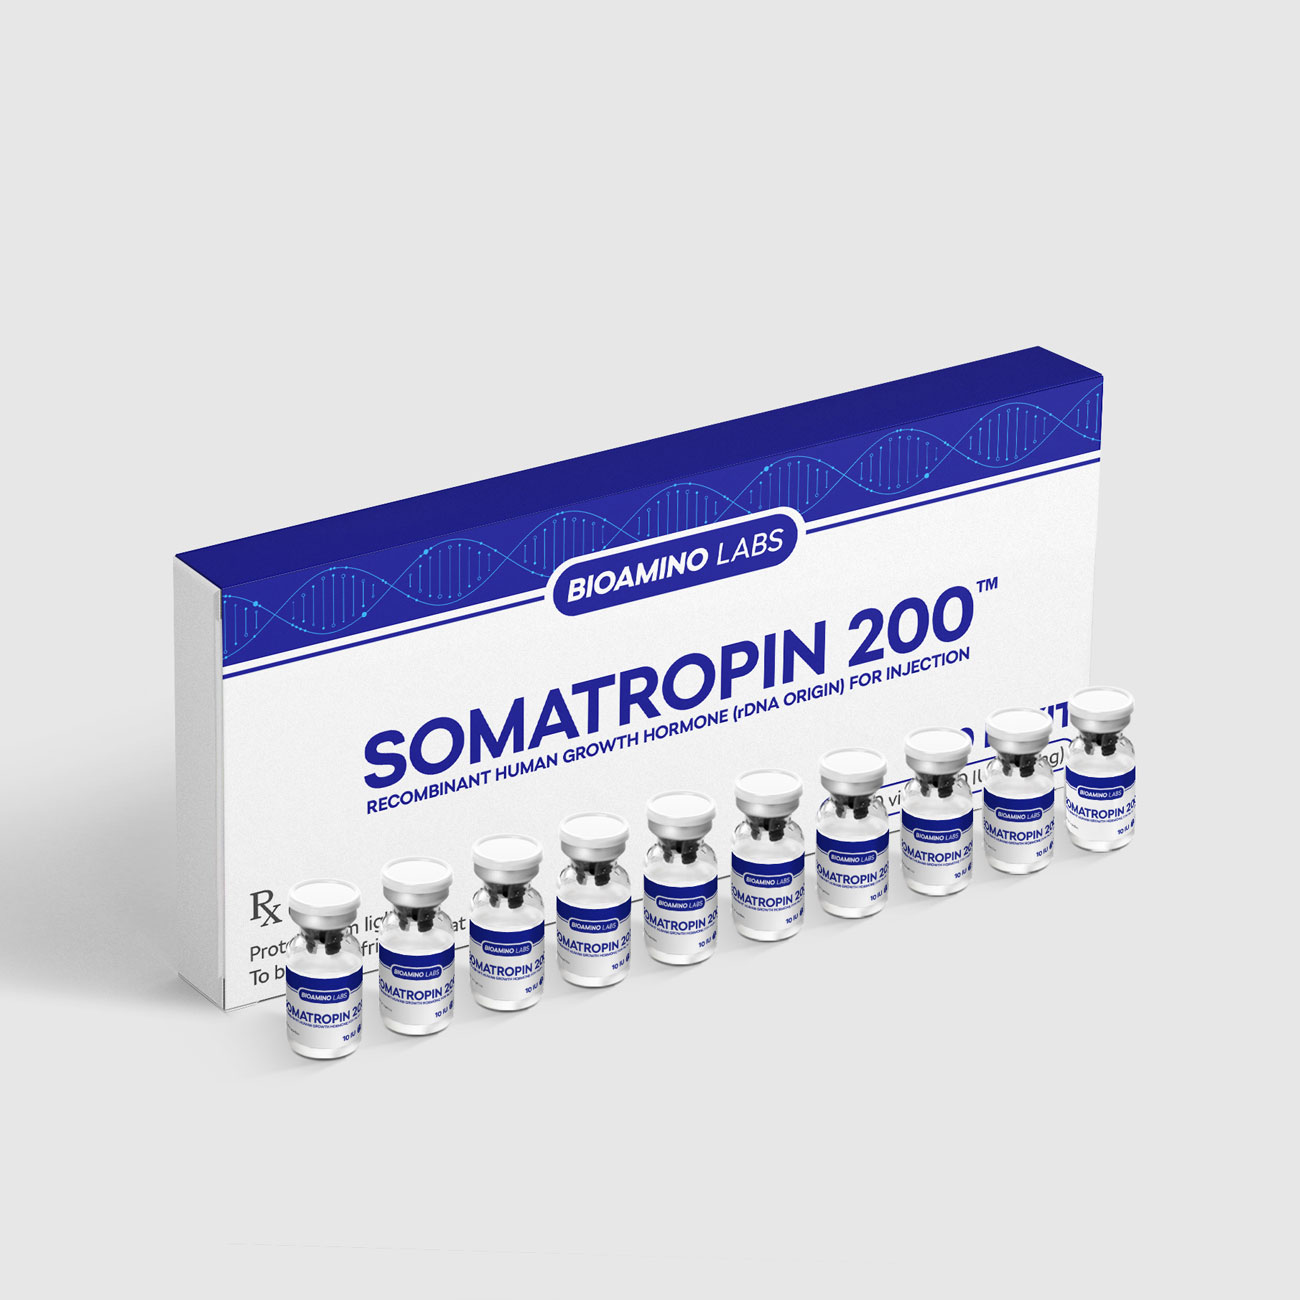 SOMATROPIN 200IU - Best HGH products from BIOAMINO LABS